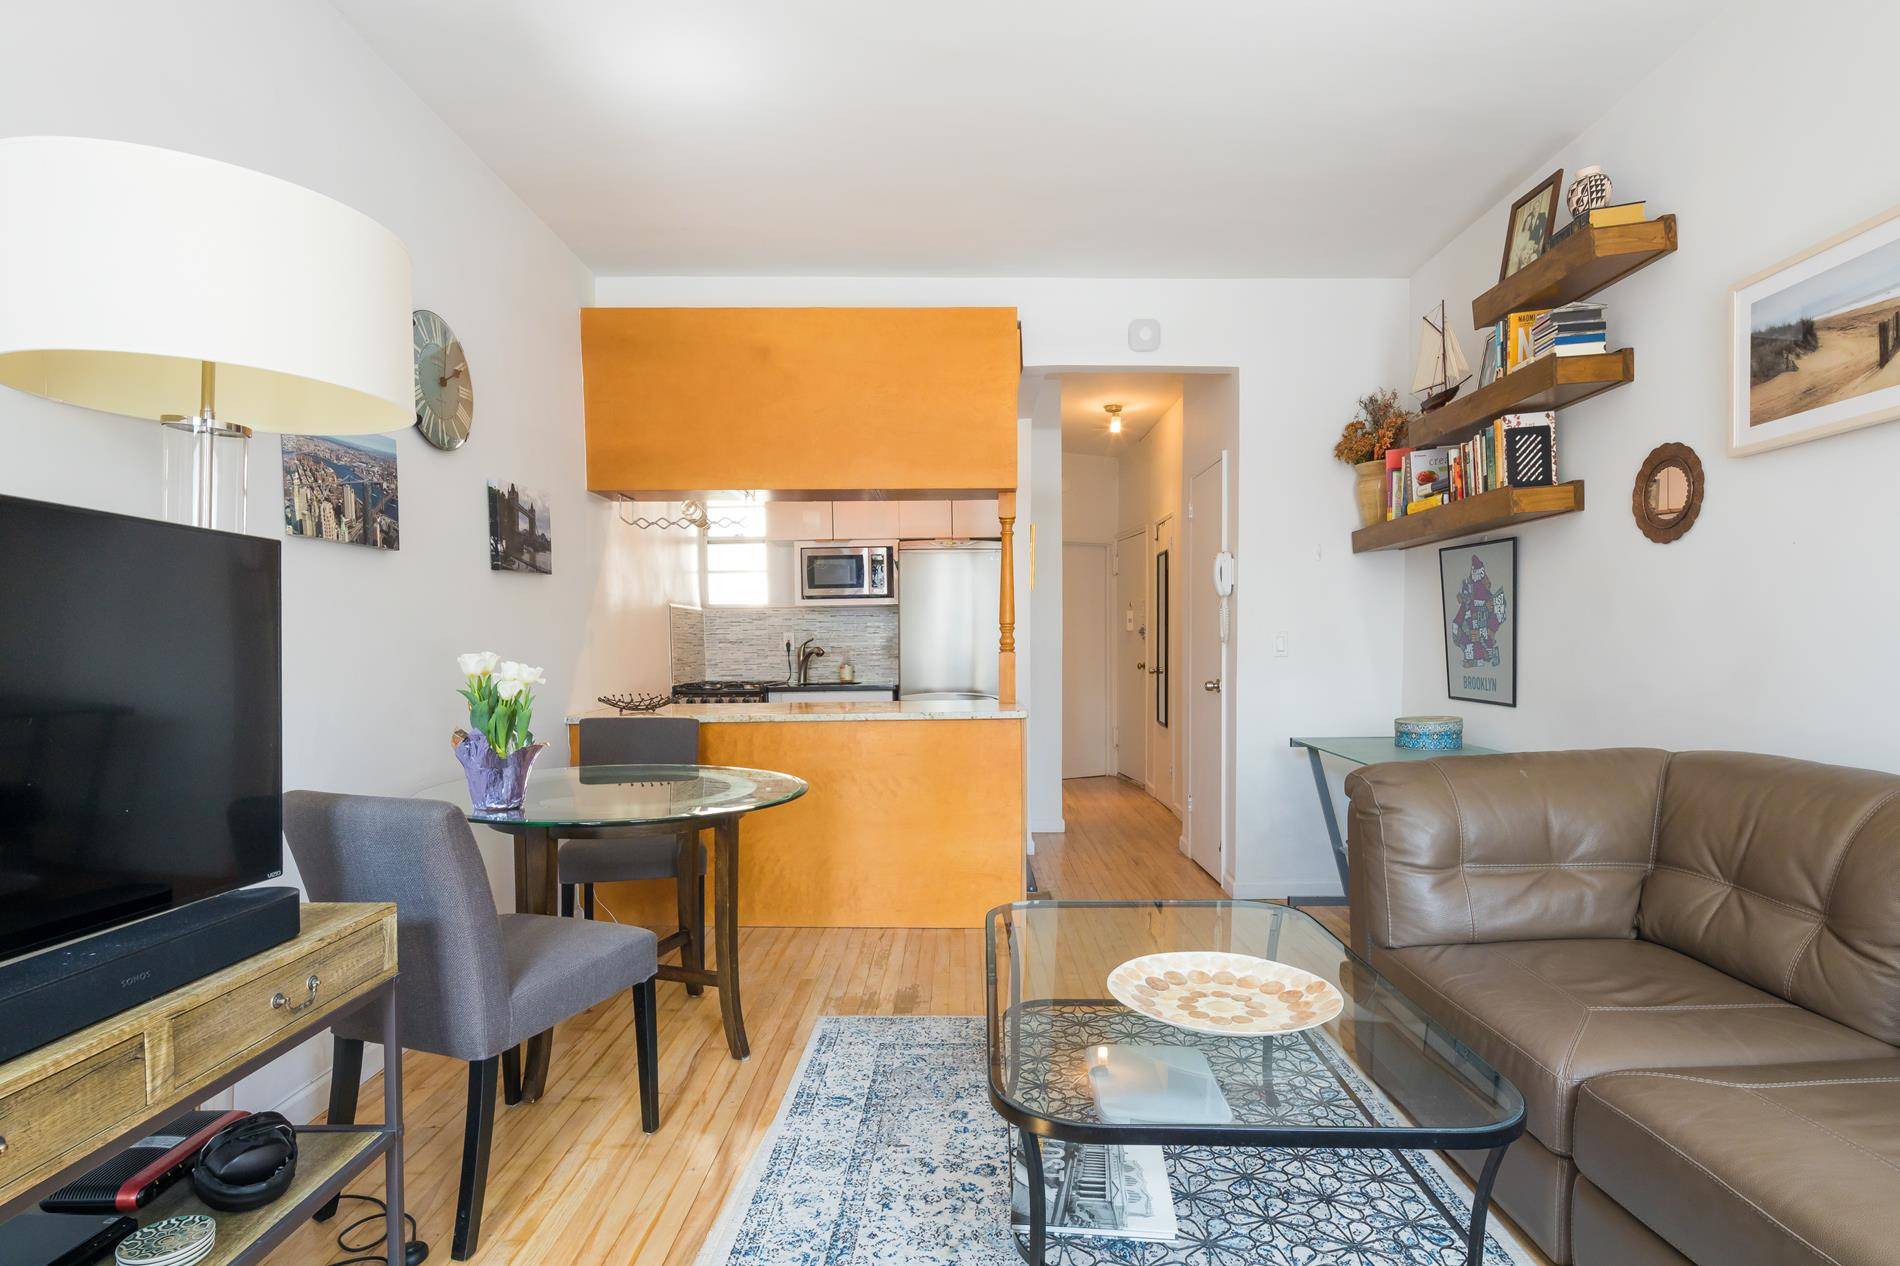 A great opportunity awaits with Apartment 5T at 415 East 80th Street.